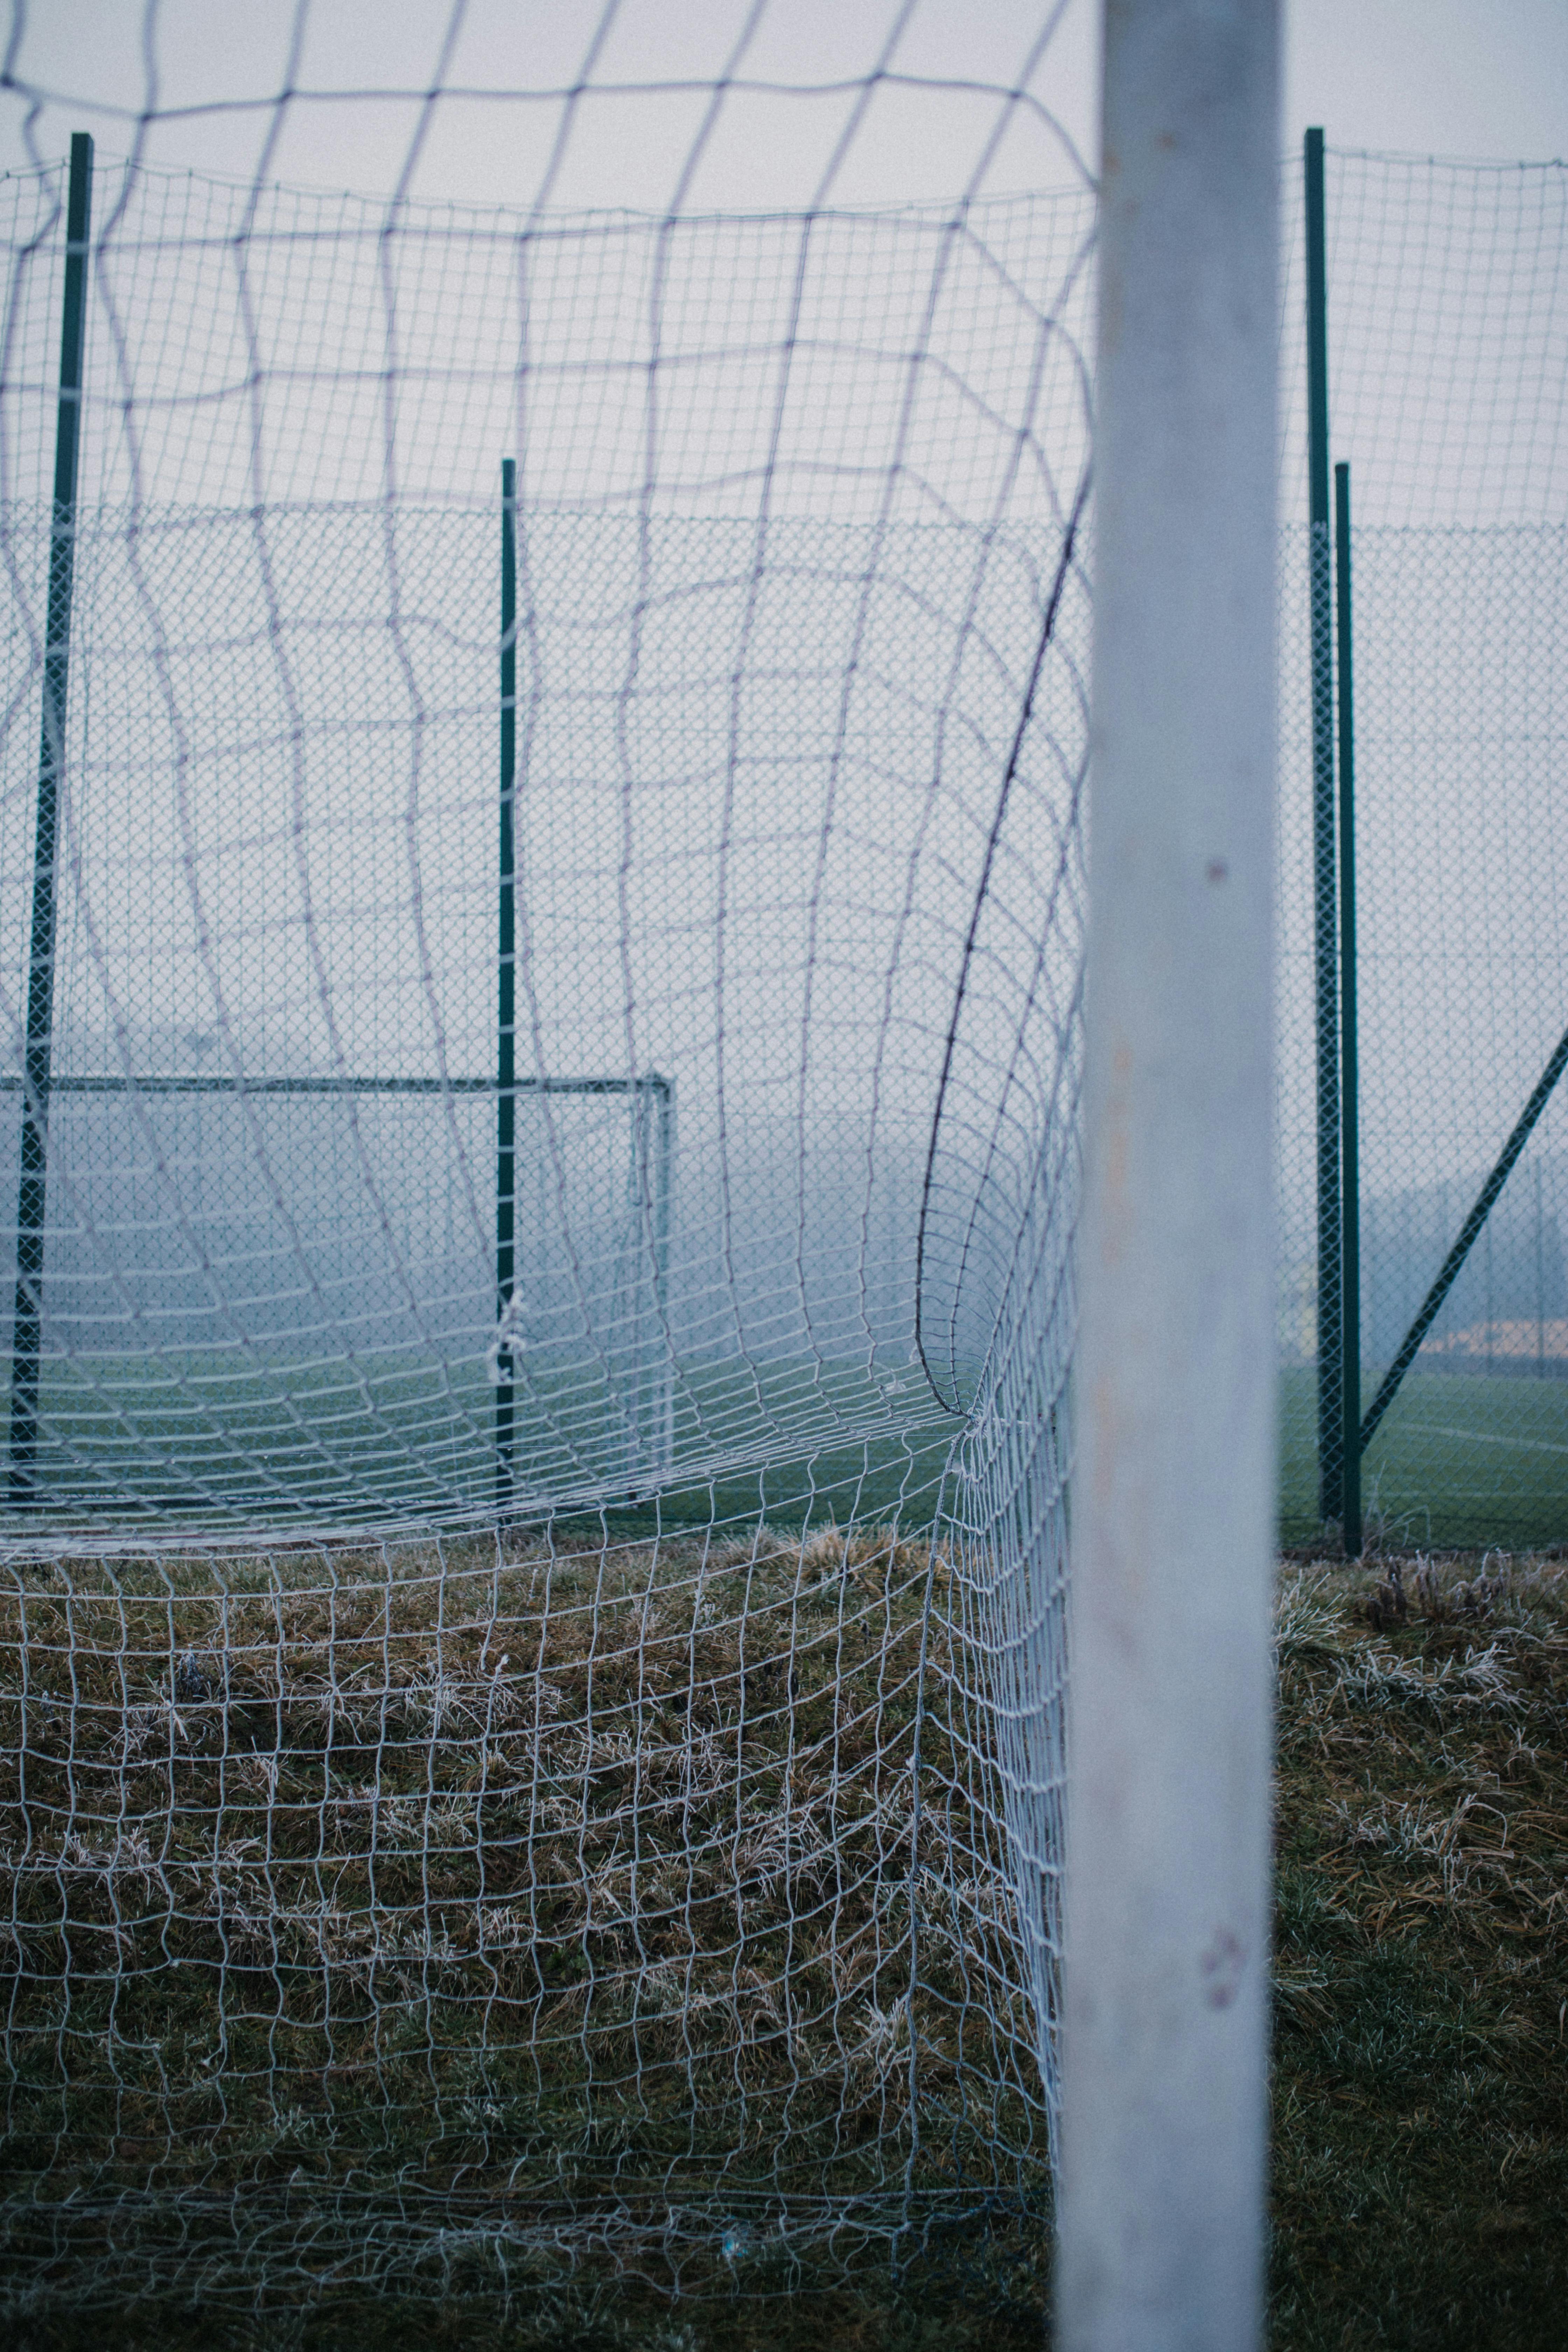 Soccer Football In Goal Net With Green Grass Field Stock Photo